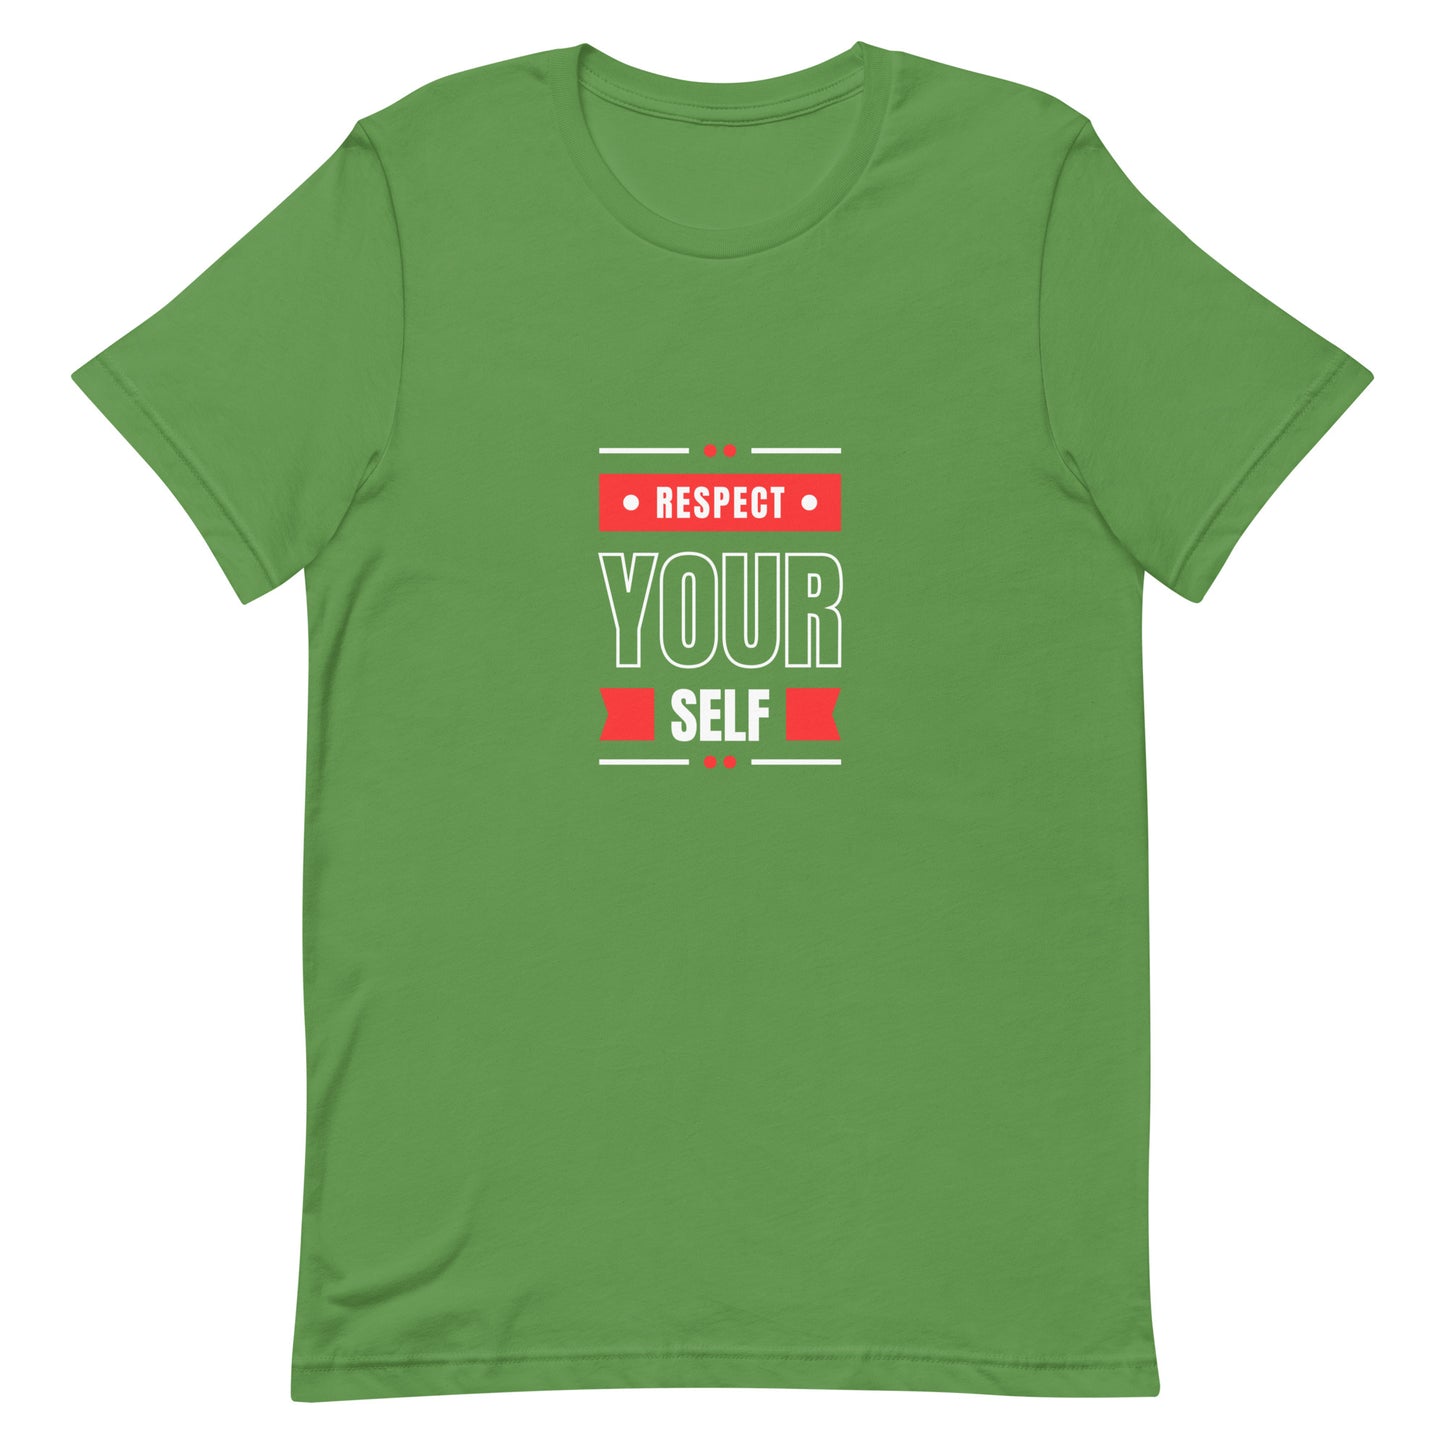 Respect Yourself t-shirt